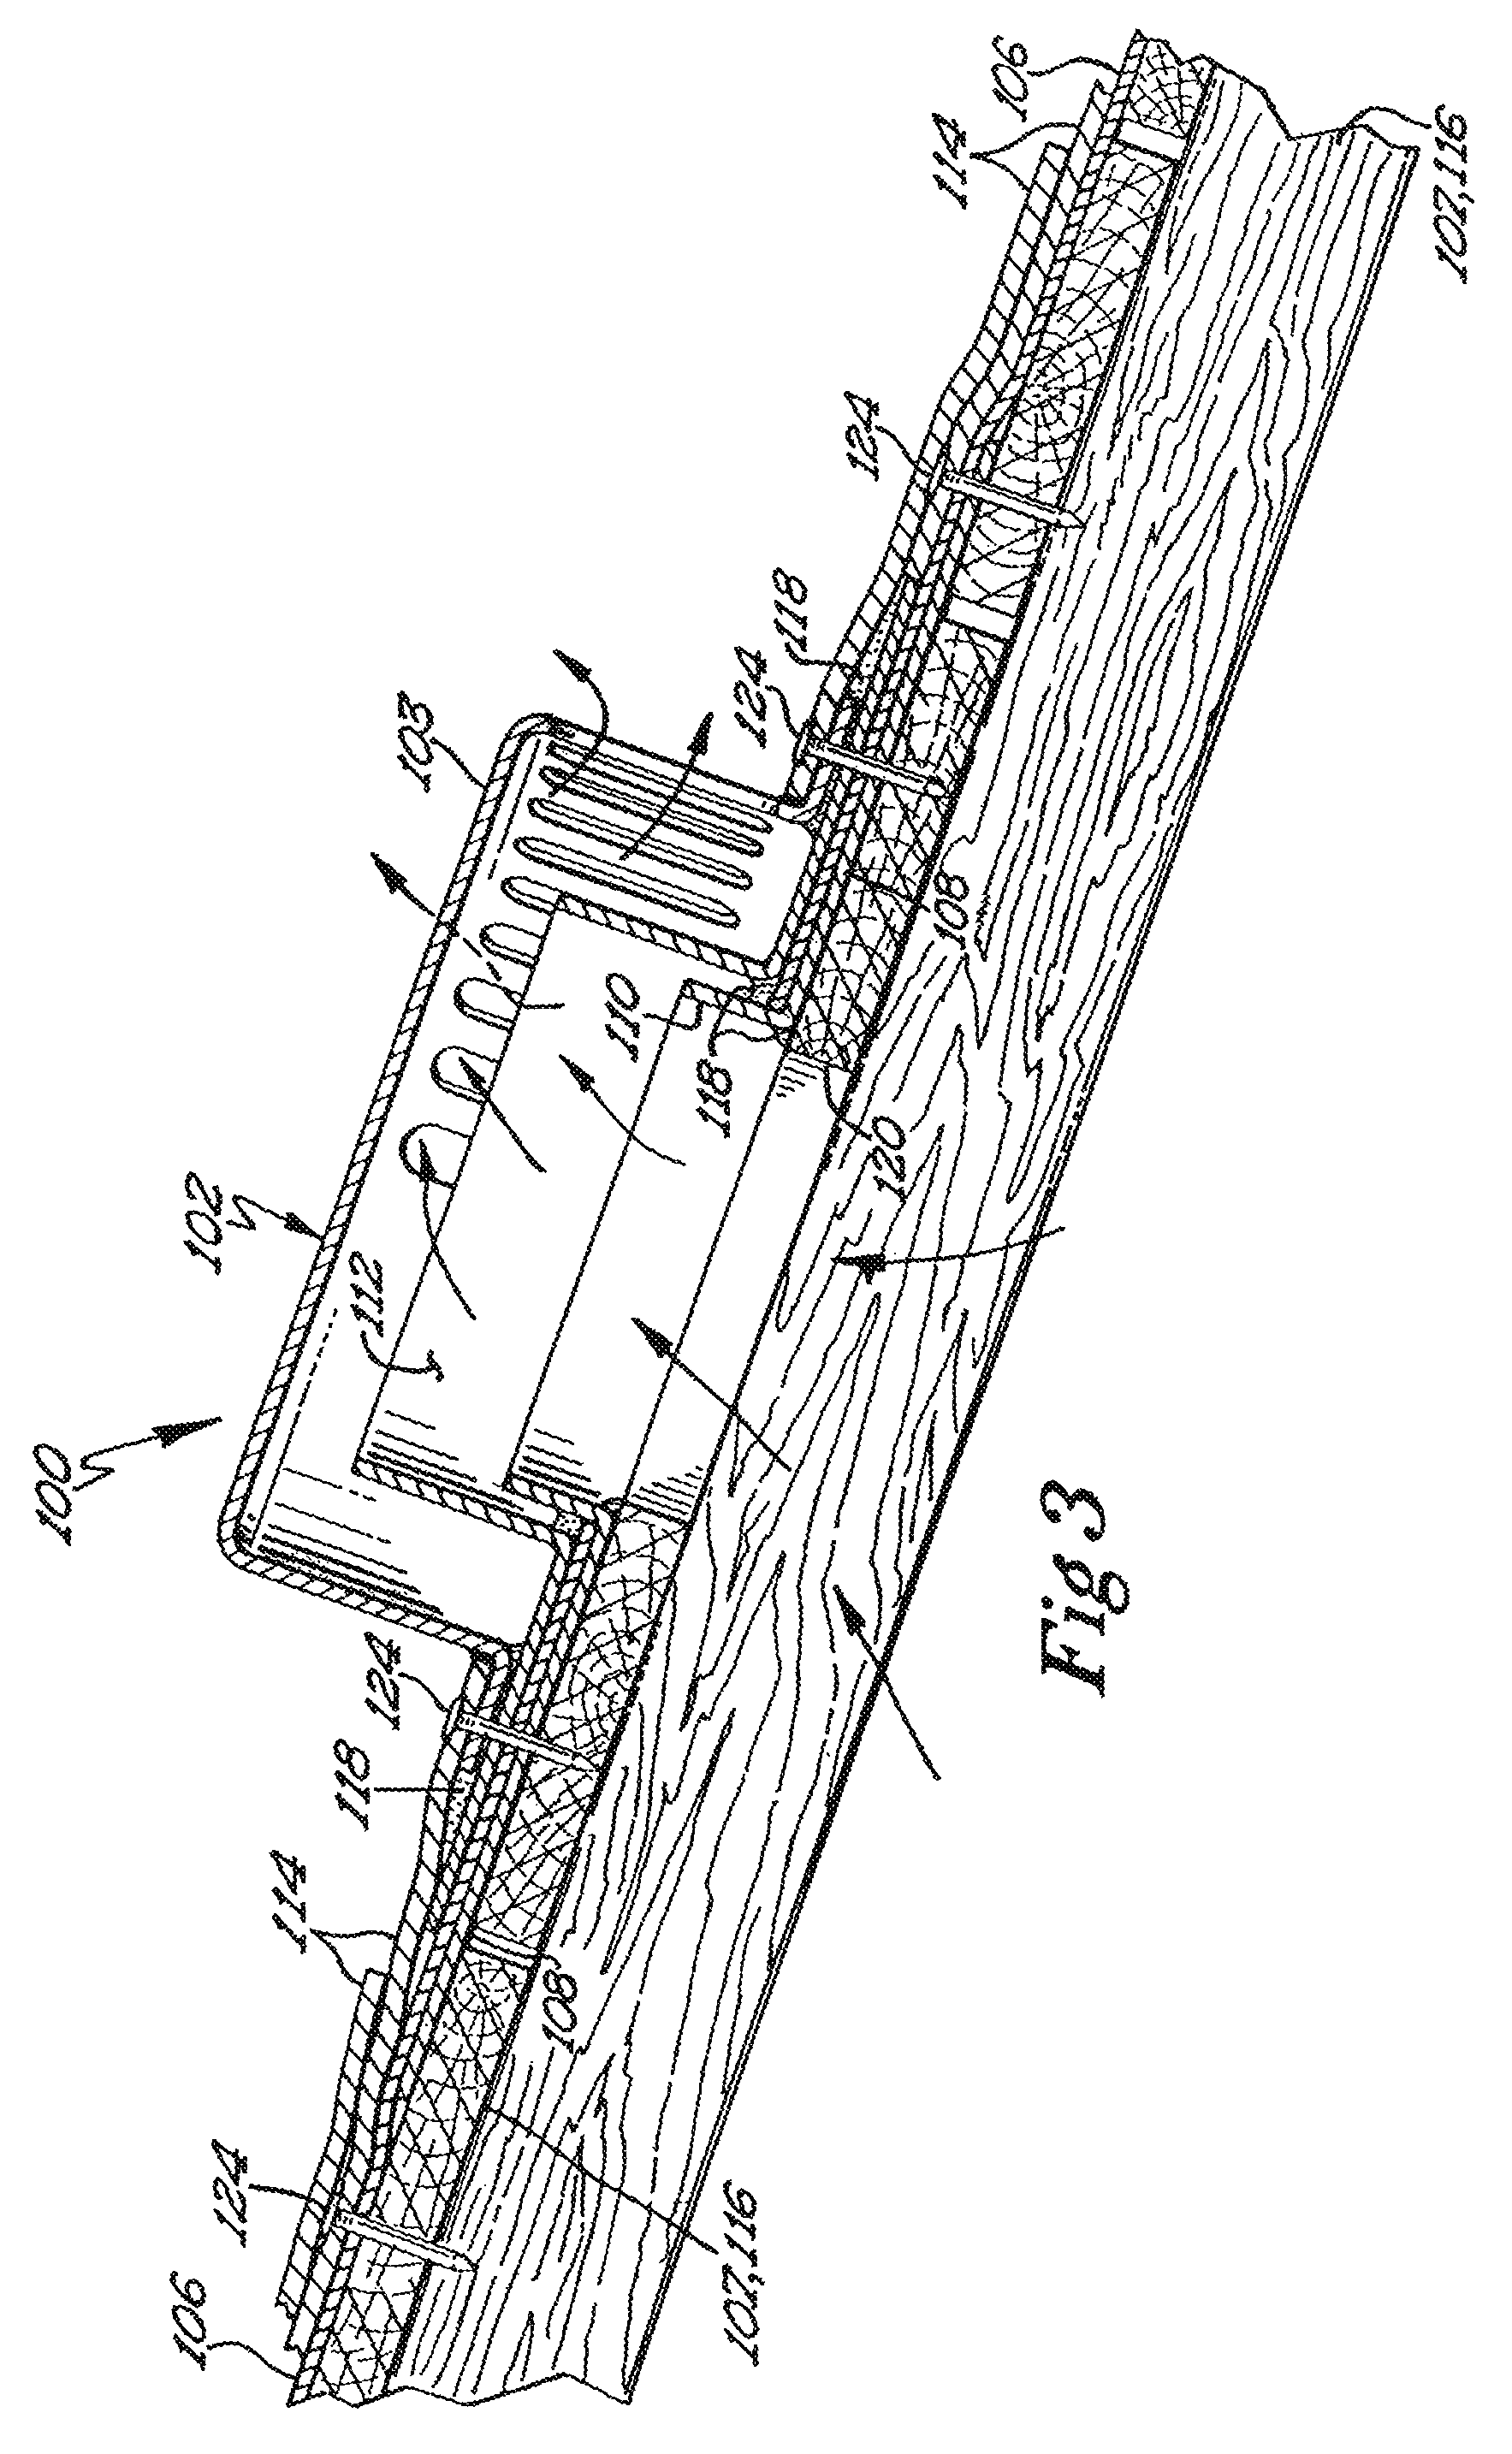 Roof vent base plate and installation methods